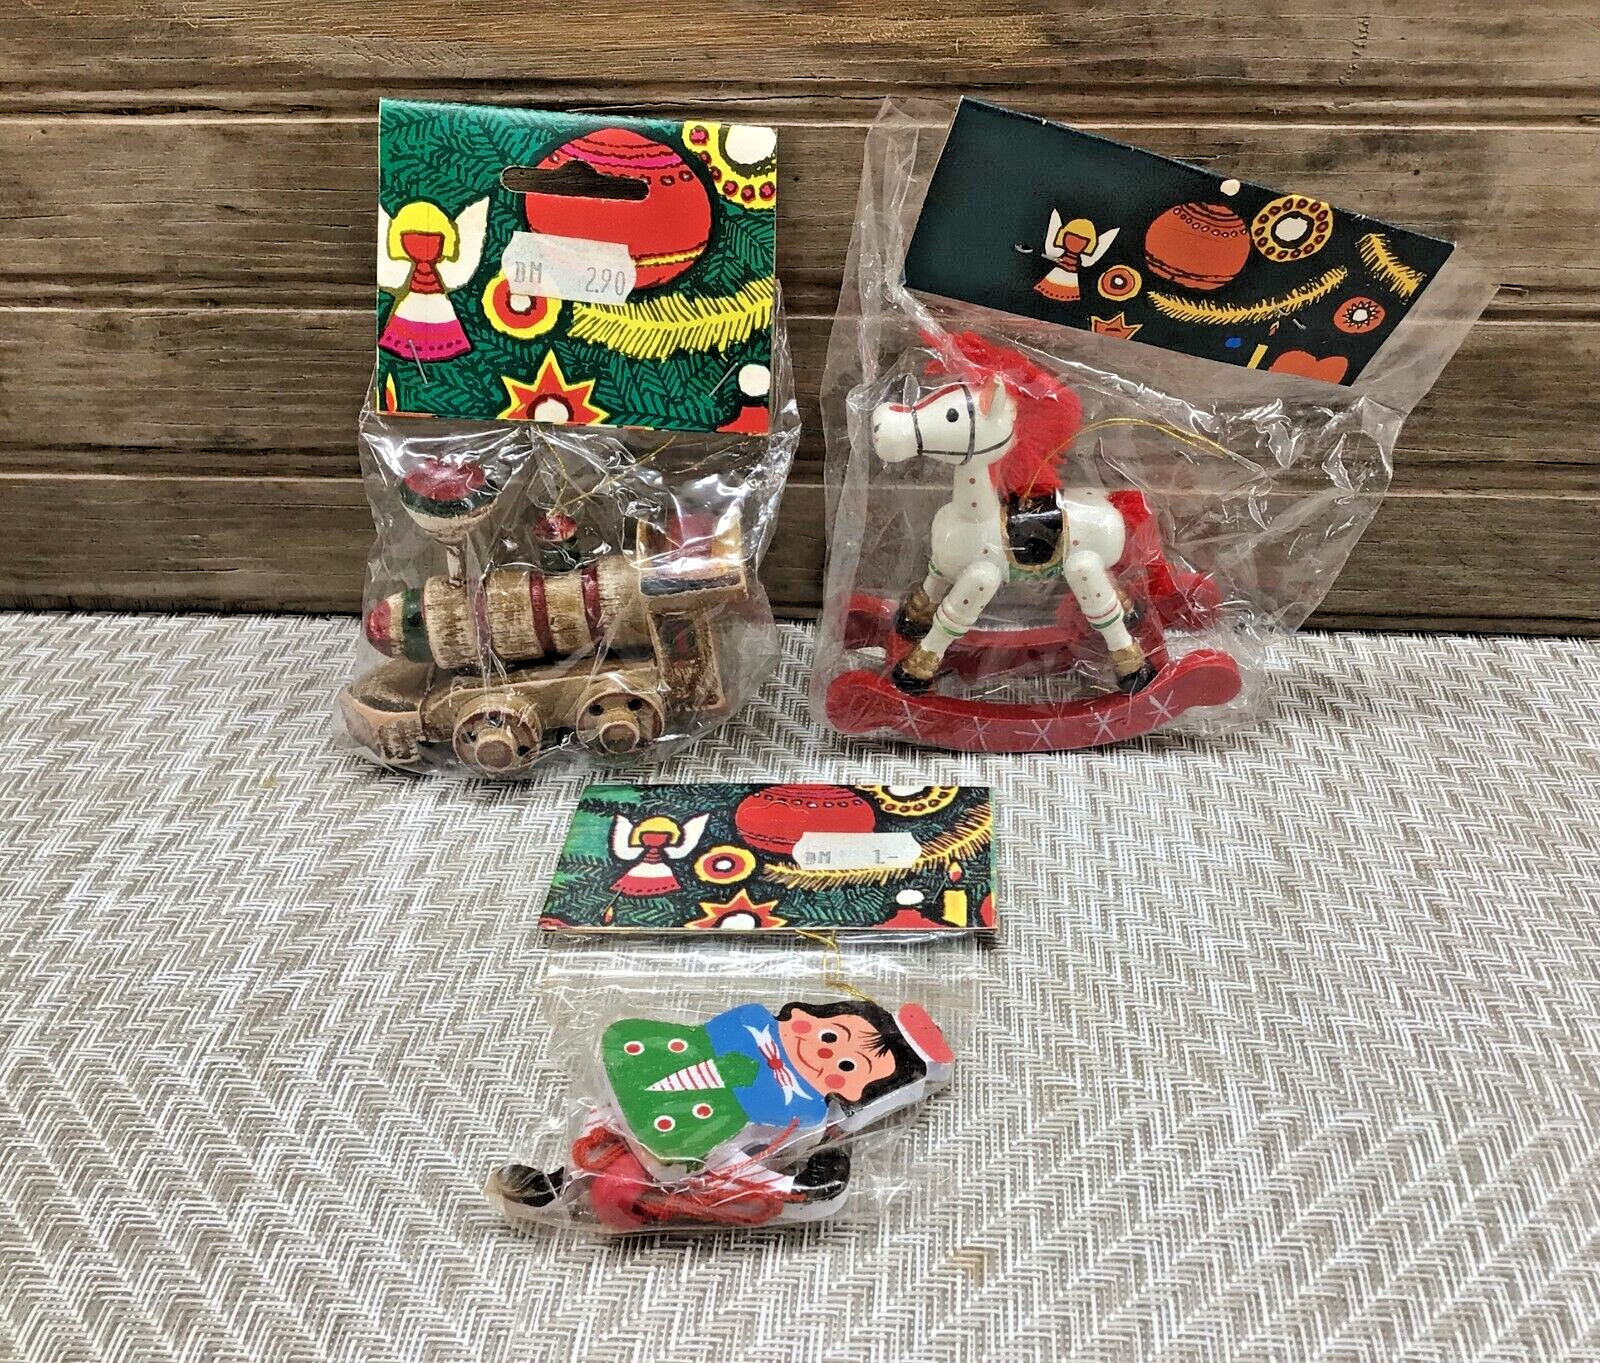 Lot of 3 Vtg Wooden Christmas Ornaments Made in Taiwan Sold in Germany DM Label